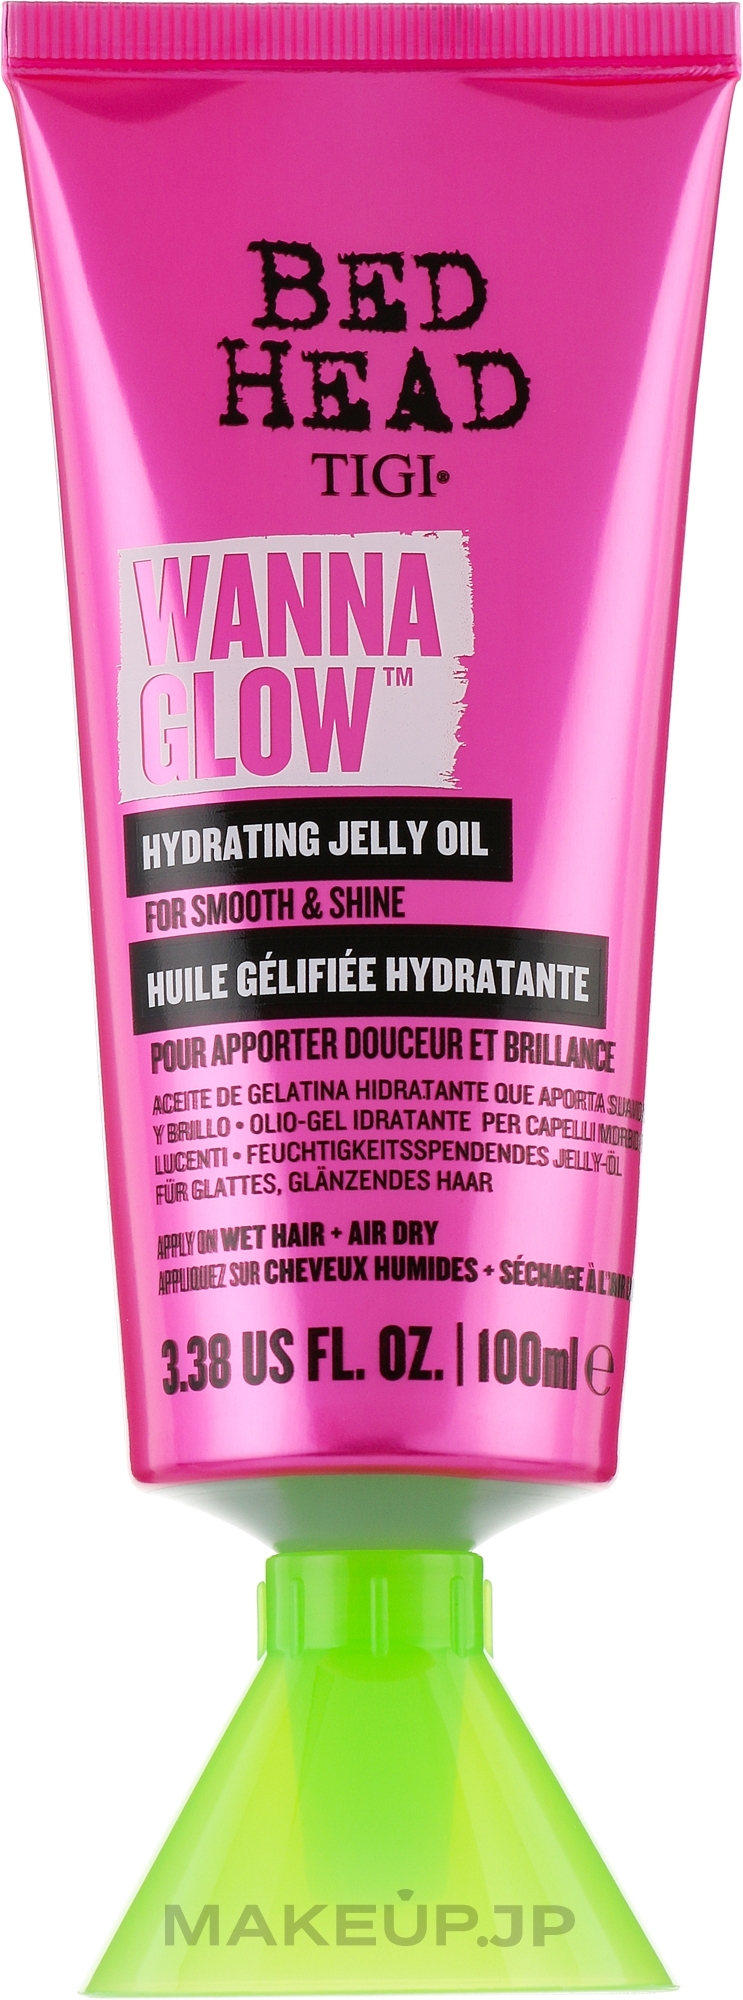 Moisturizing Jelly Butter for Radiant Smooth Hair - Tigi Bed Head Wanna Glow Hydrating Jelly Oil — photo 100 ml